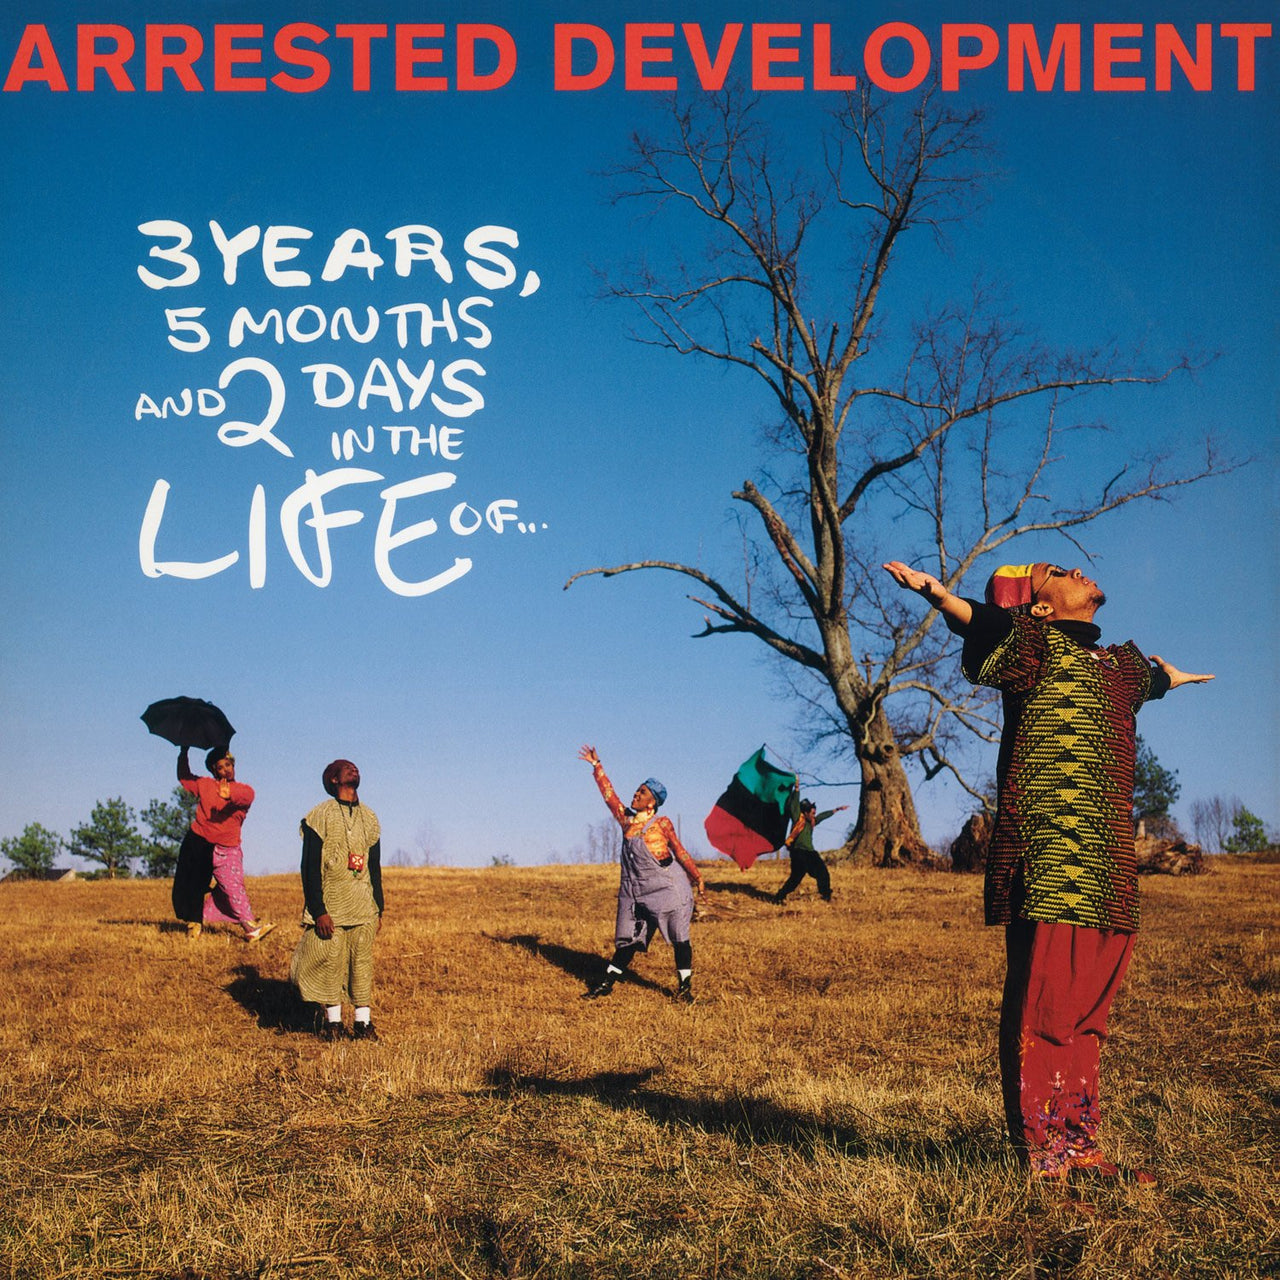 ARRESTED DEVELOPMENT - 3 YEARS 5 MONTHS AND 2 DAYS… (1LP)